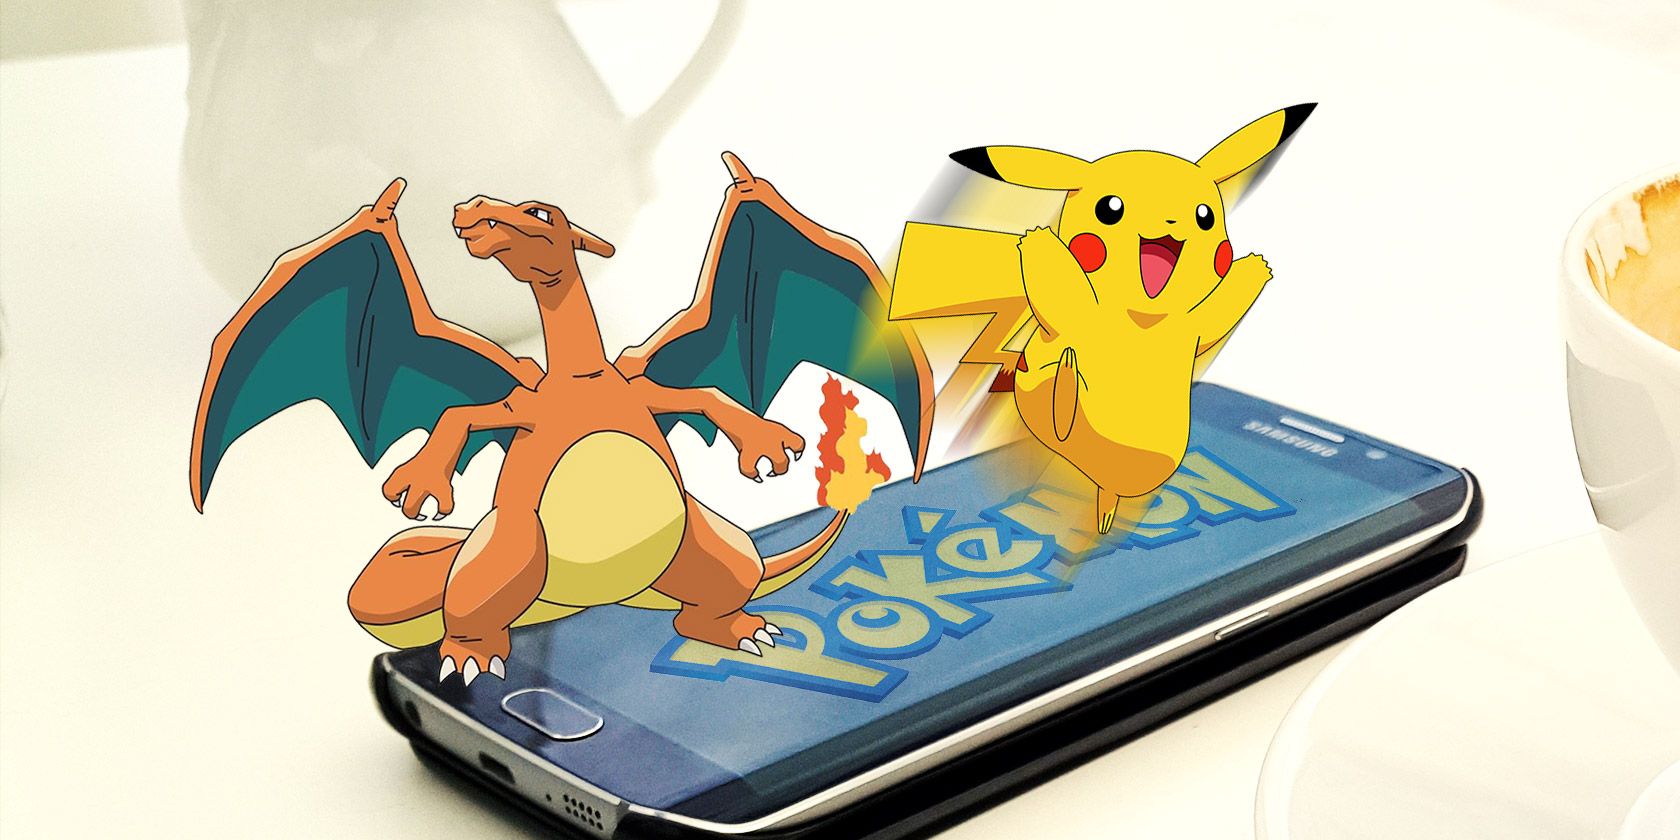 How to Run Old Pokemon Games on Your Android Device